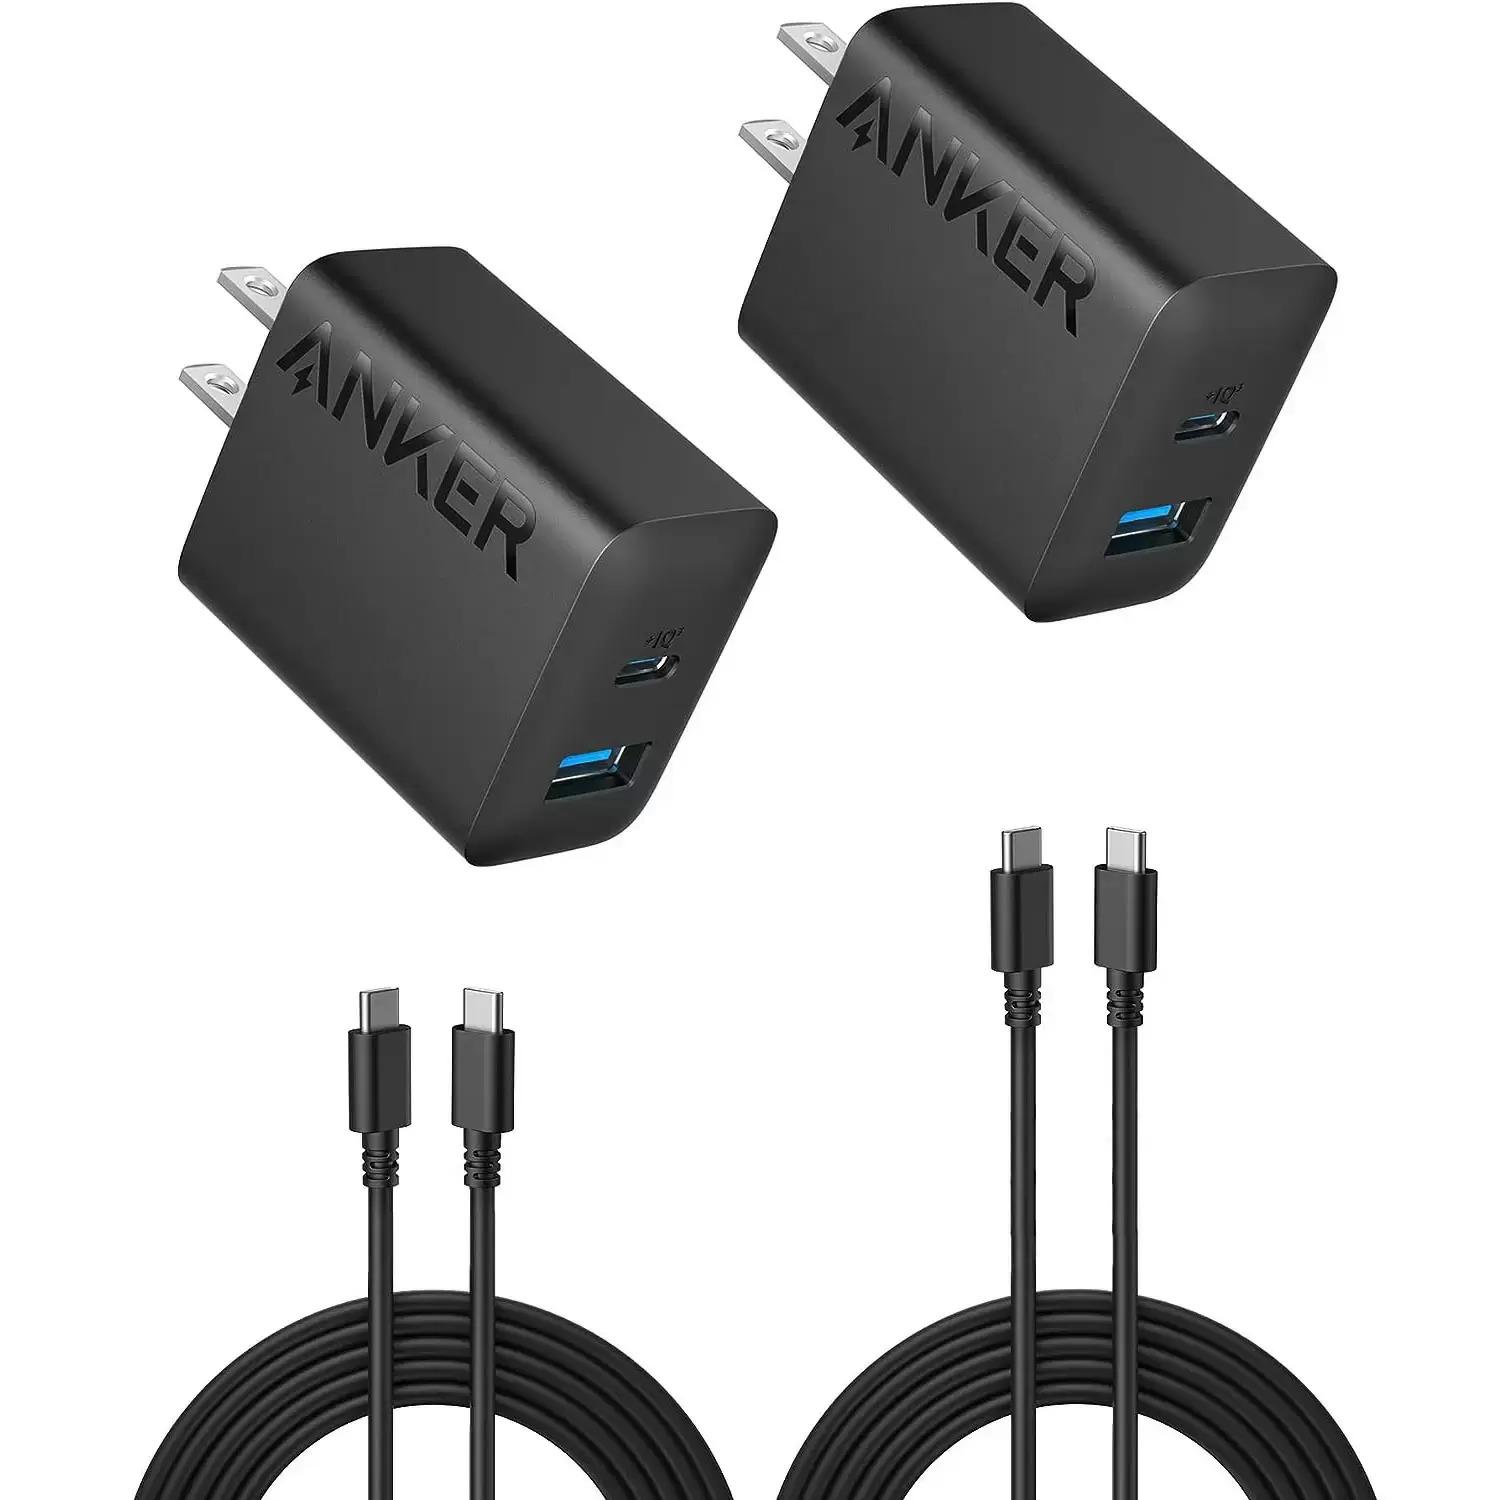 Anker 20W 2-Port USB Type-C and Type-A Black Wall Charger 2 Pack for $12.99